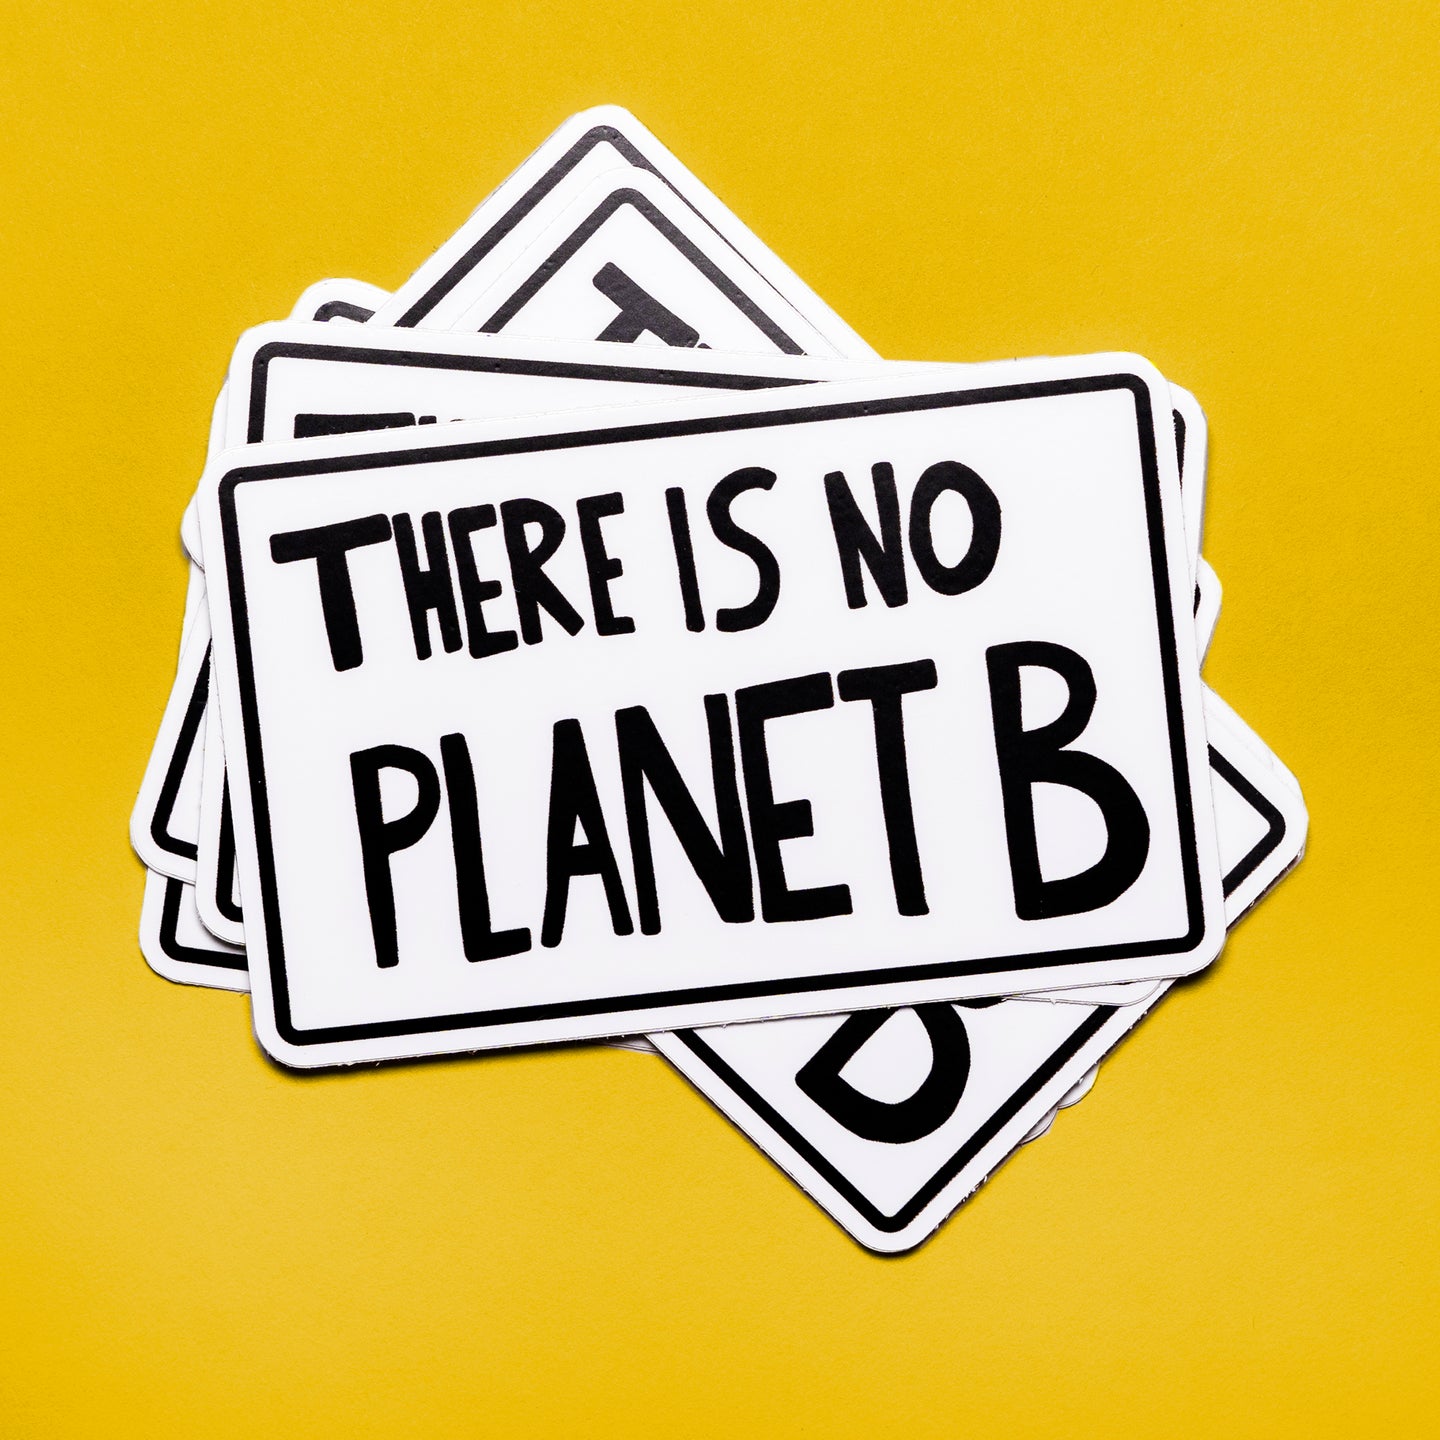 There is no Planet B protest poster - vinyl sticker